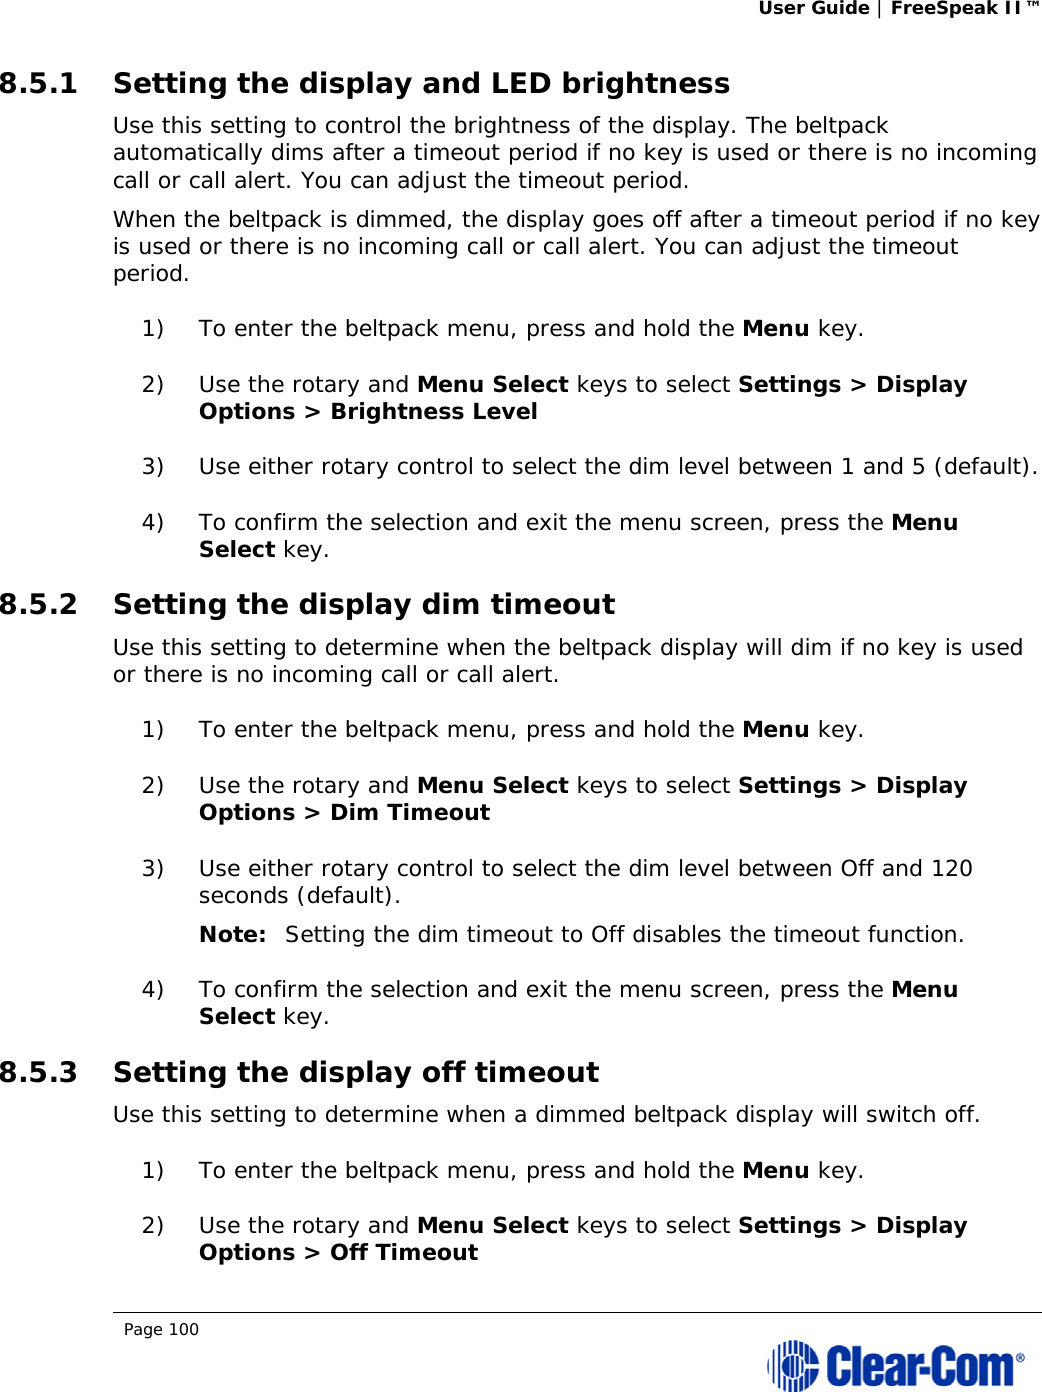 User Guide | FreeSpeak II™  Page 100  8.5.1 Setting the display and LED brightness Use this setting to control the brightness of the display. The beltpack automatically dims after a timeout period if no key is used or there is no incoming call or call alert. You can adjust the timeout period. When the beltpack is dimmed, the display goes off after a timeout period if no key is used or there is no incoming call or call alert. You can adjust the timeout period. 1) To enter the beltpack menu, press and hold the Menu key. 2) Use the rotary and Menu Select keys to select Settings &gt; Display Options &gt; Brightness Level 3) Use either rotary control to select the dim level between 1 and 5 (default). 4) To confirm the selection and exit the menu screen, press the Menu Select key. 8.5.2 Setting the display dim timeout Use this setting to determine when the beltpack display will dim if no key is used or there is no incoming call or call alert. 1) To enter the beltpack menu, press and hold the Menu key. 2) Use the rotary and Menu Select keys to select Settings &gt; Display Options &gt; Dim Timeout 3) Use either rotary control to select the dim level between Off and 120 seconds (default). Note: Setting the dim timeout to Off disables the timeout function. 4) To confirm the selection and exit the menu screen, press the Menu Select key. 8.5.3 Setting the display off timeout Use this setting to determine when a dimmed beltpack display will switch off. 1) To enter the beltpack menu, press and hold the Menu key. 2) Use the rotary and Menu Select keys to select Settings &gt; Display Options &gt; Off Timeout 